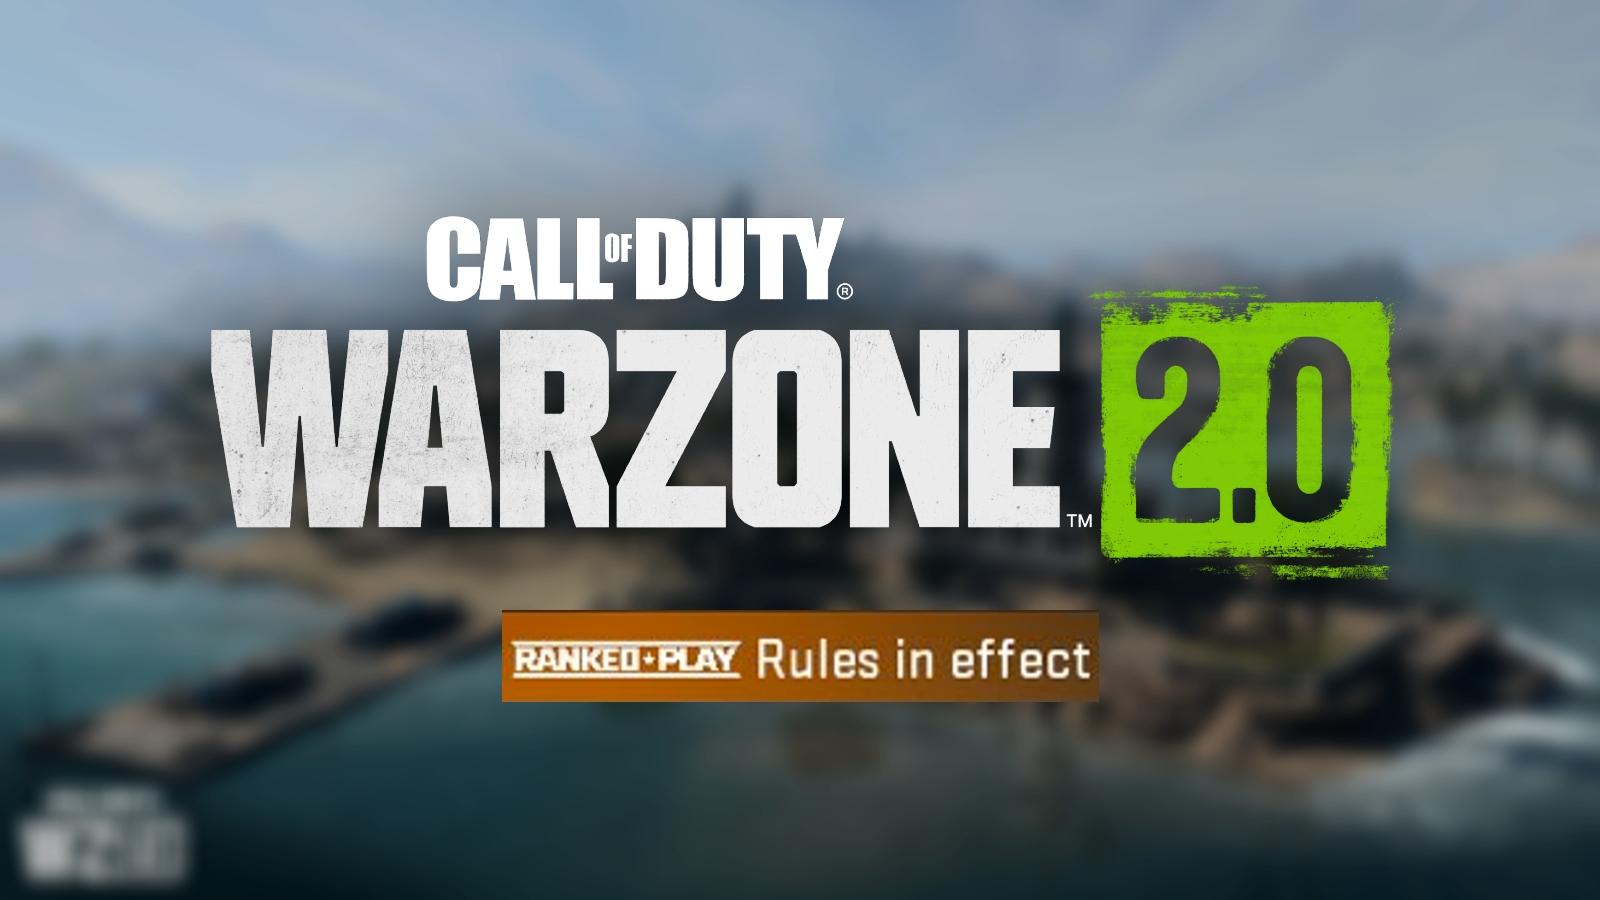 warzone 2 logo on al mazrah background with Ranked Play text